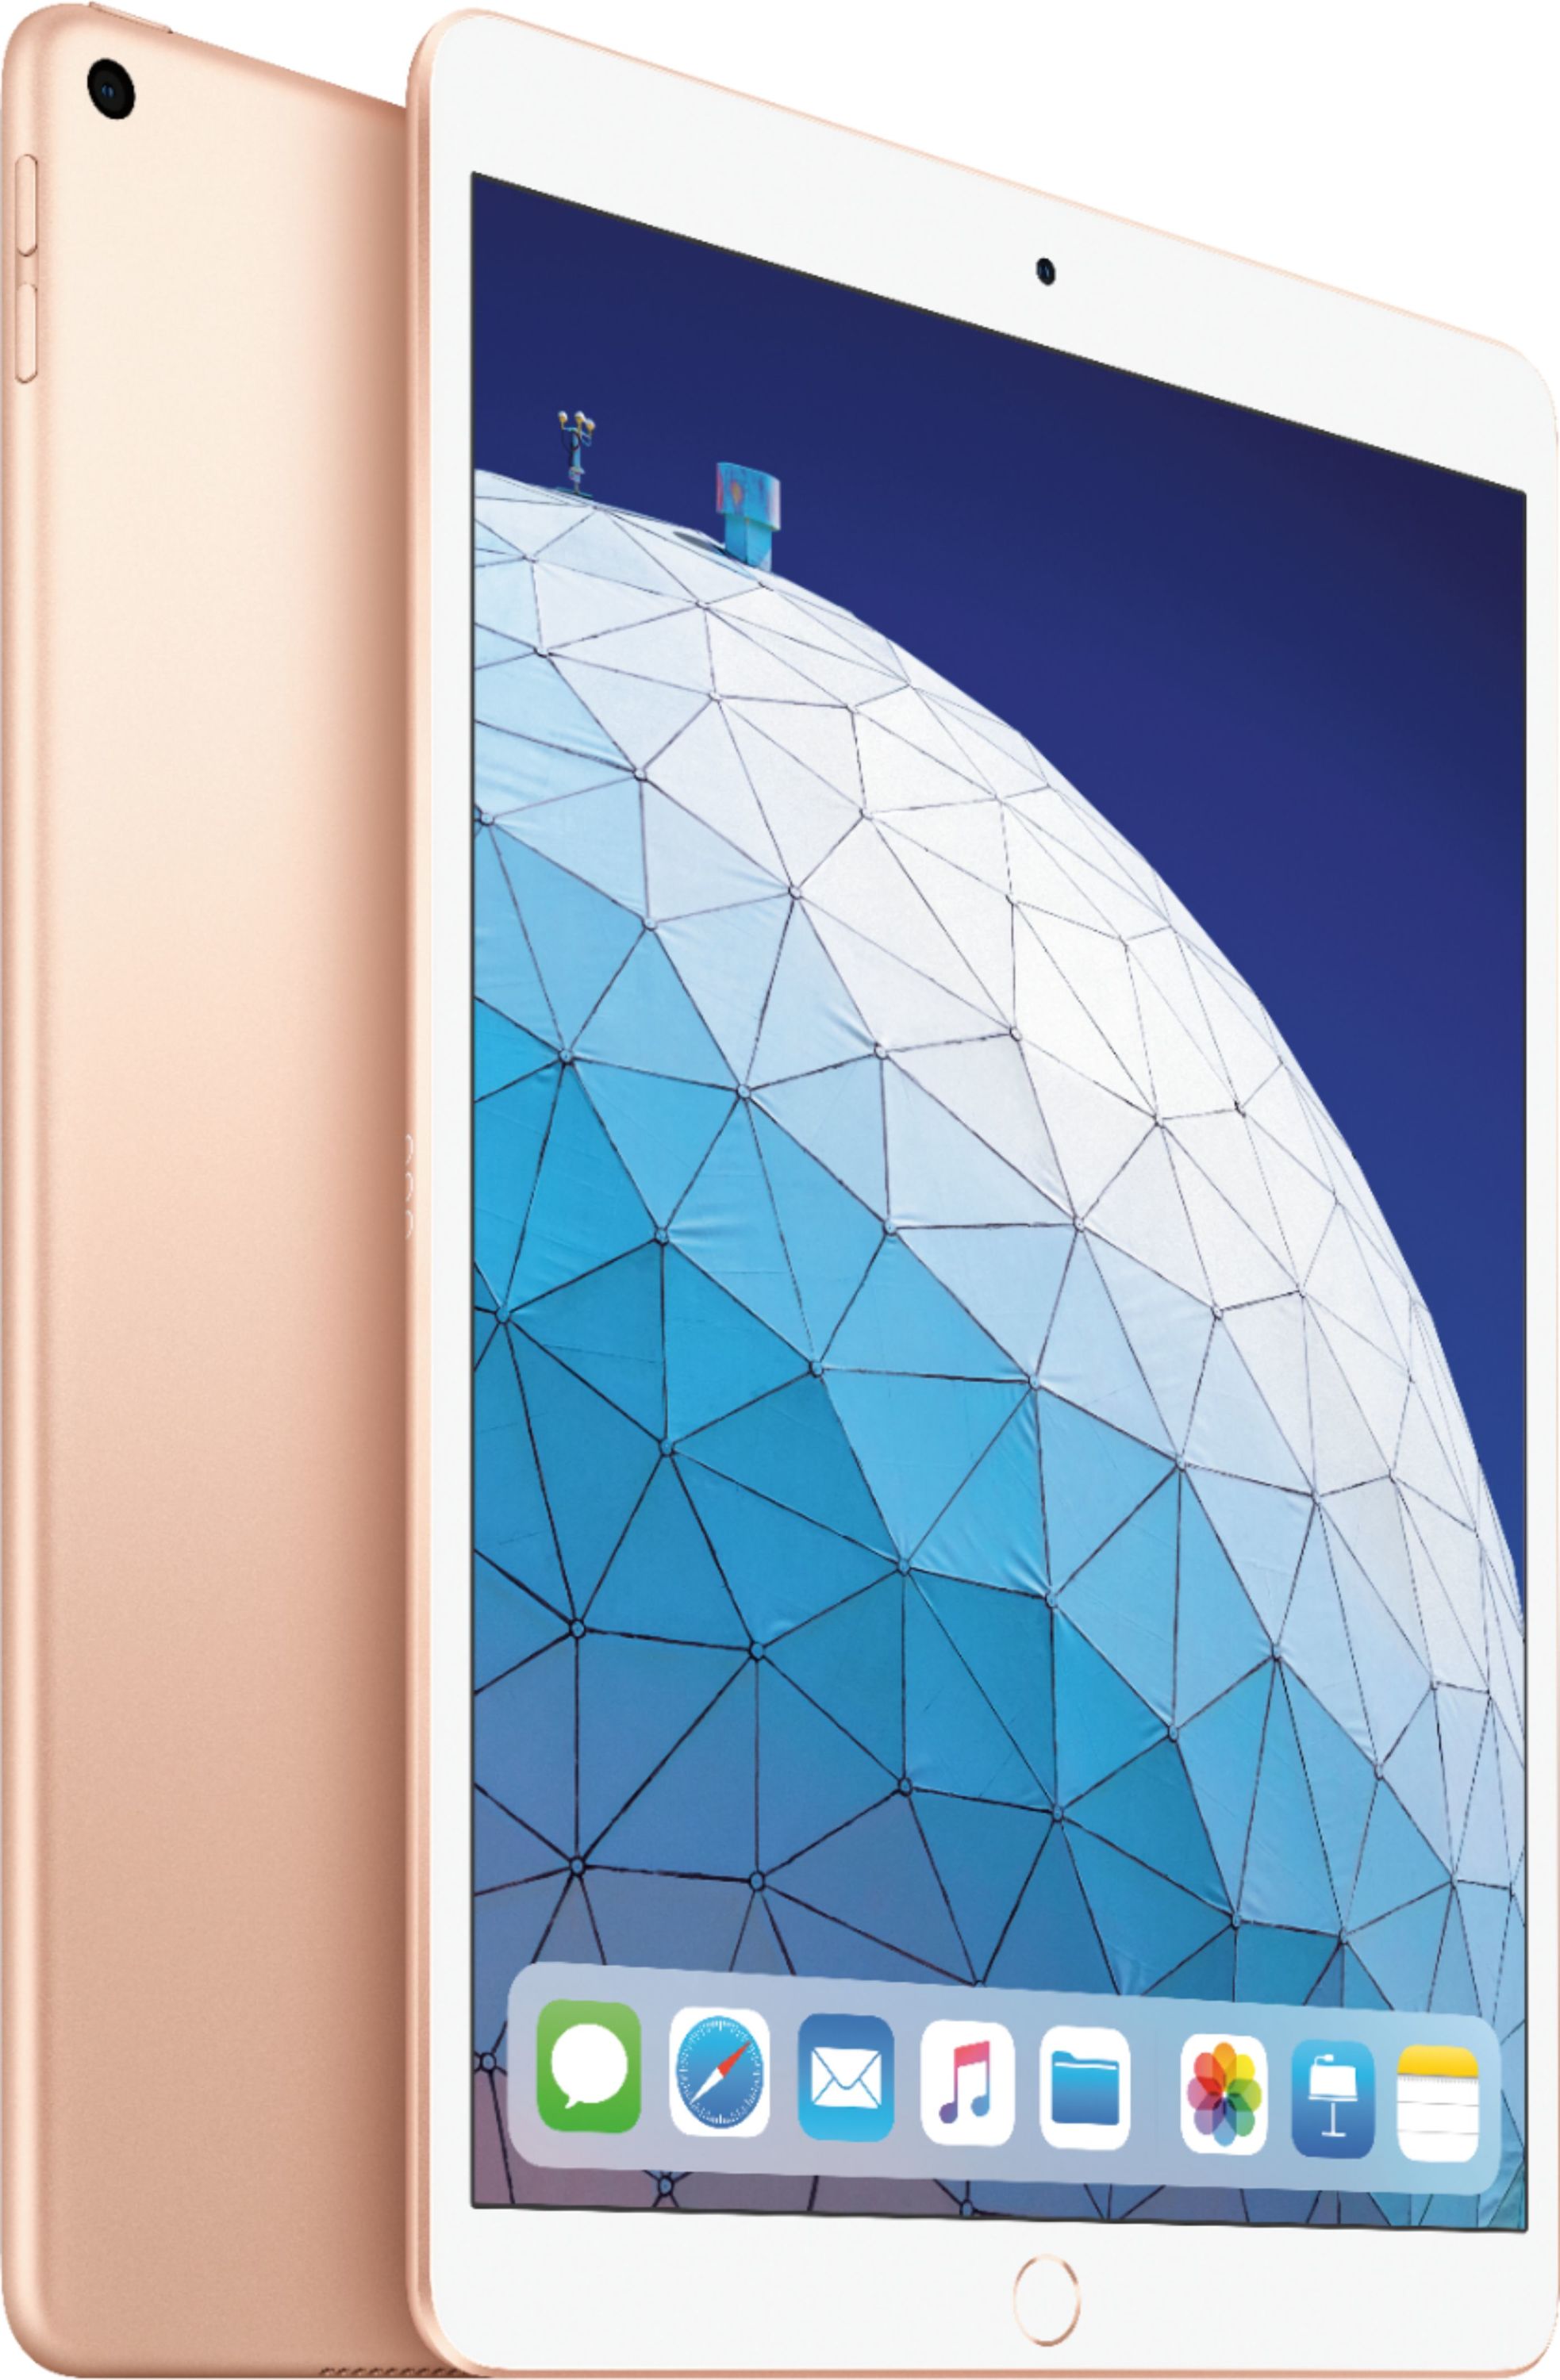 Apple iPad Air 3 64GB Wi-Fi Tablet (MUUL2LL/A) - Gold (Certified Used) - image 1 of 4